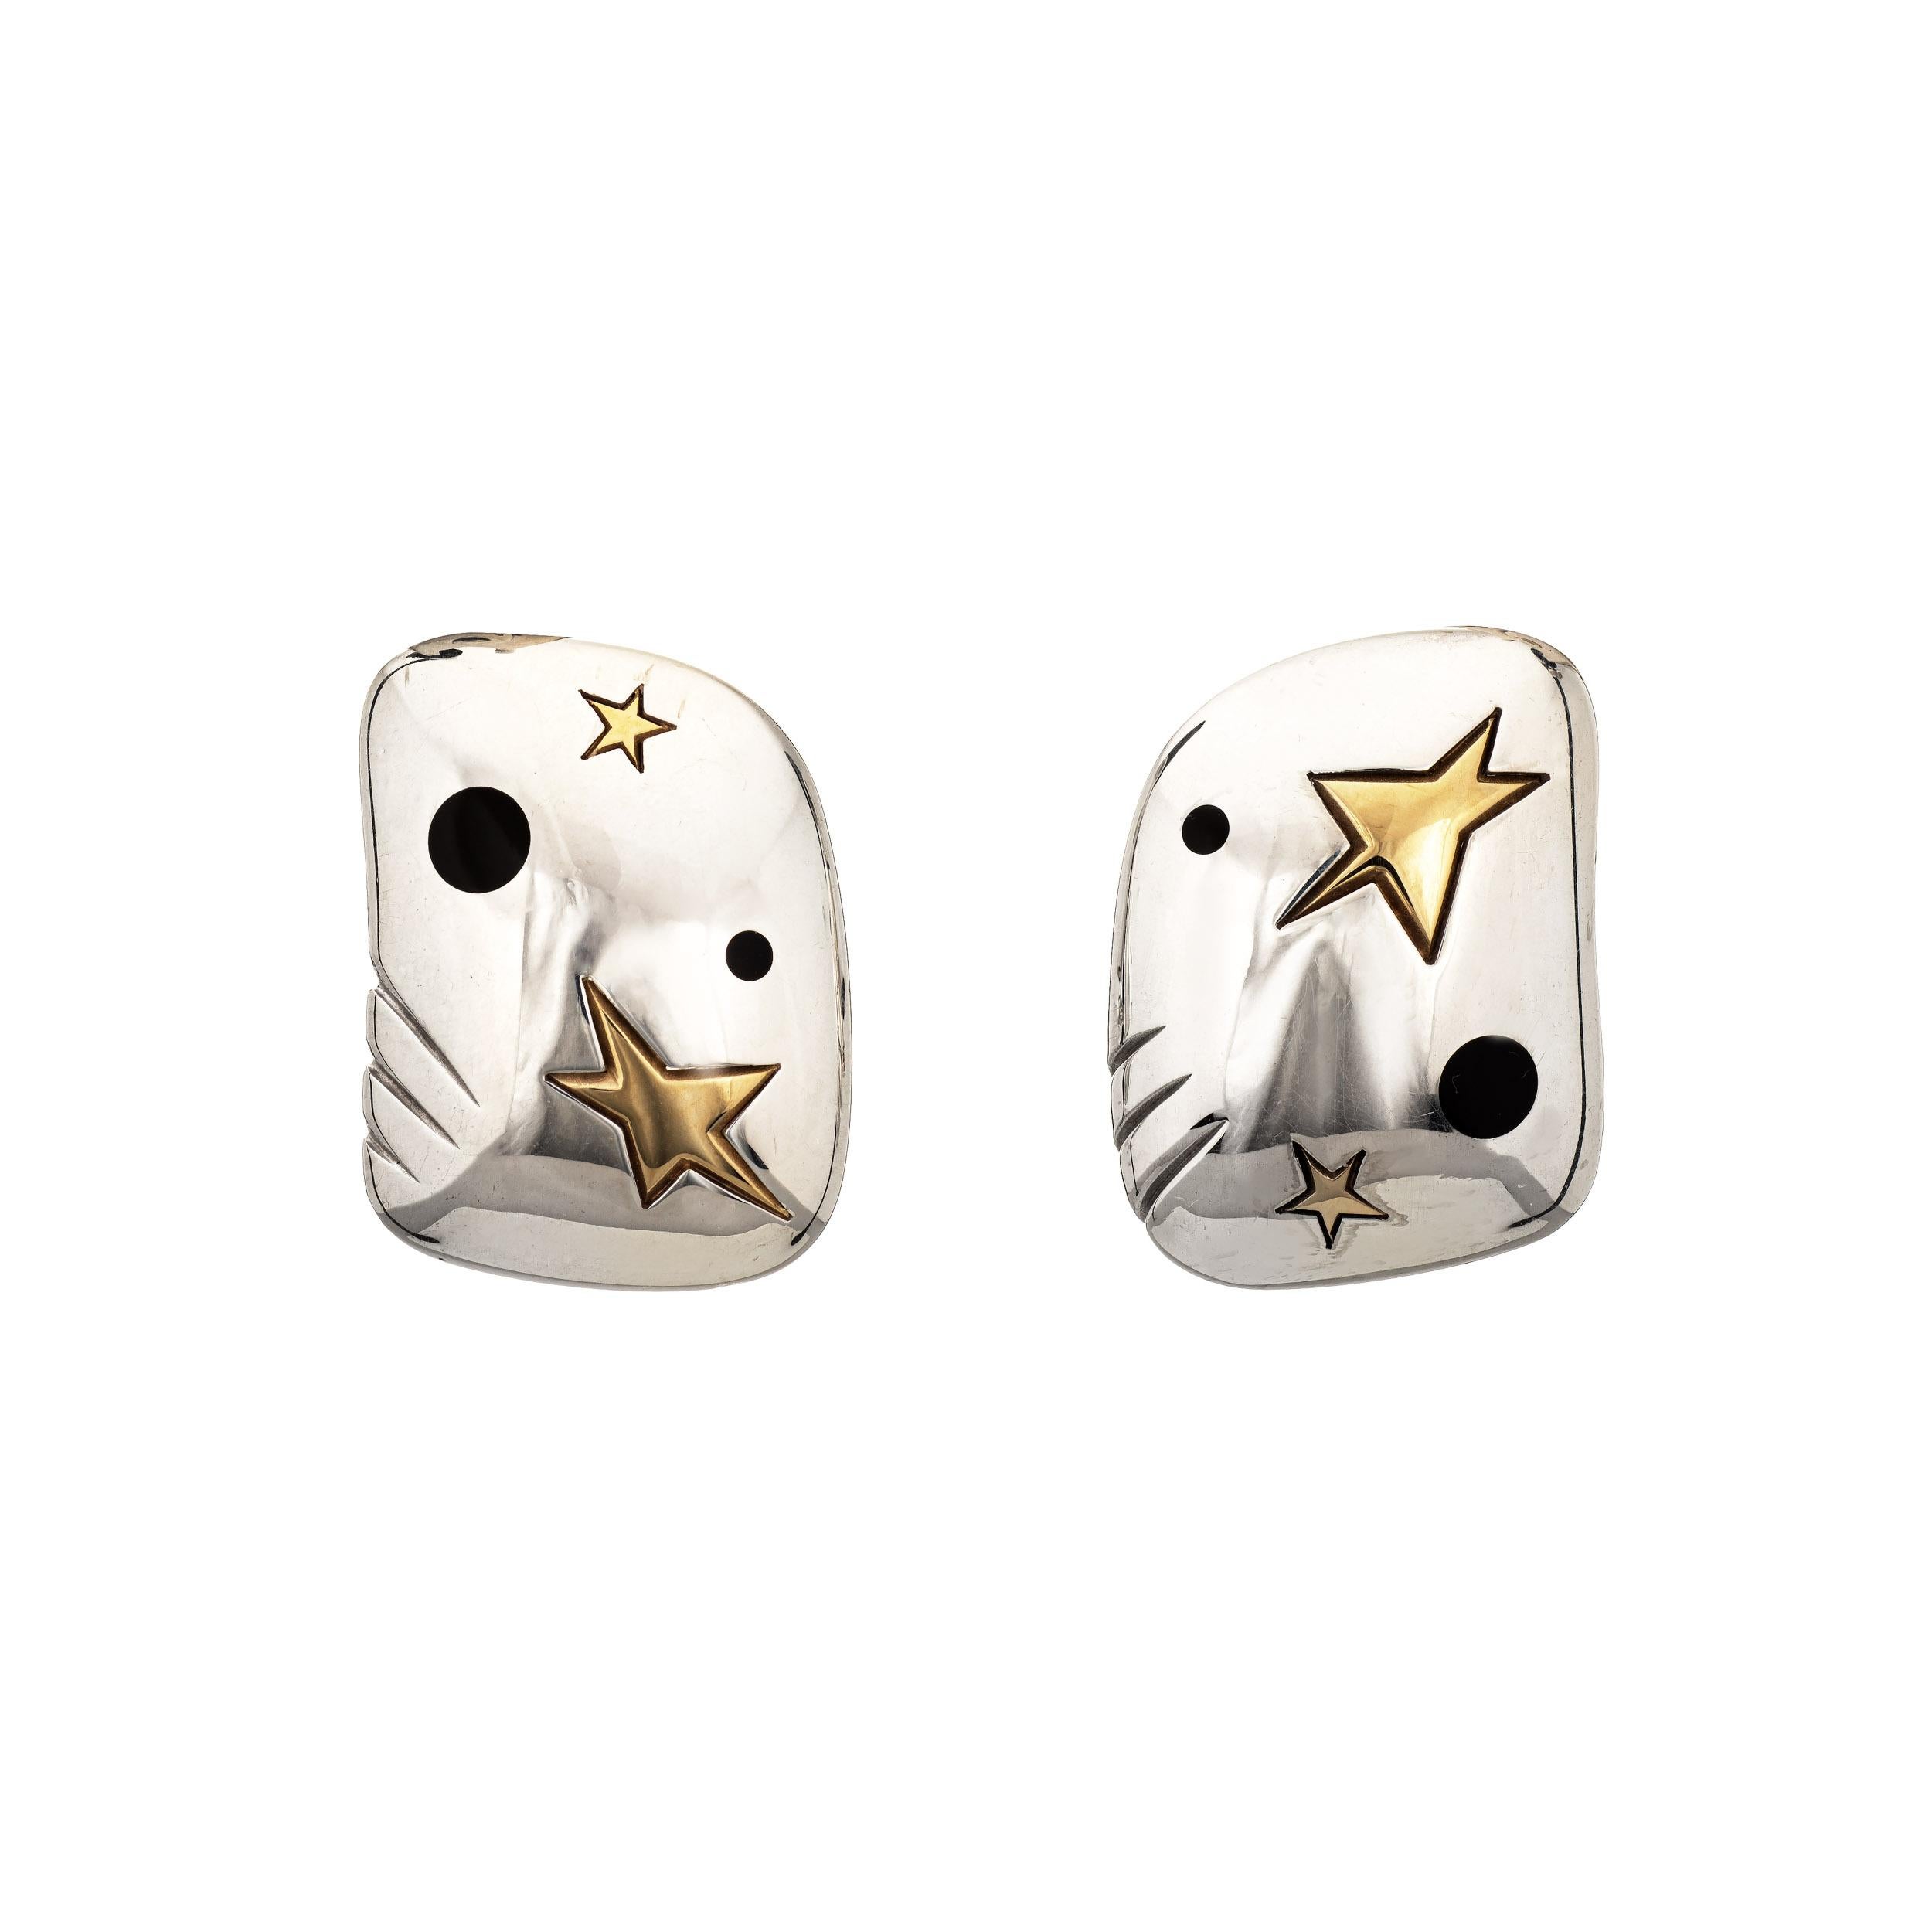 Contemporary Michael Bondanza Star Earrings Estate Sterling Silver 18k Yellow Gold Jewelry For Sale